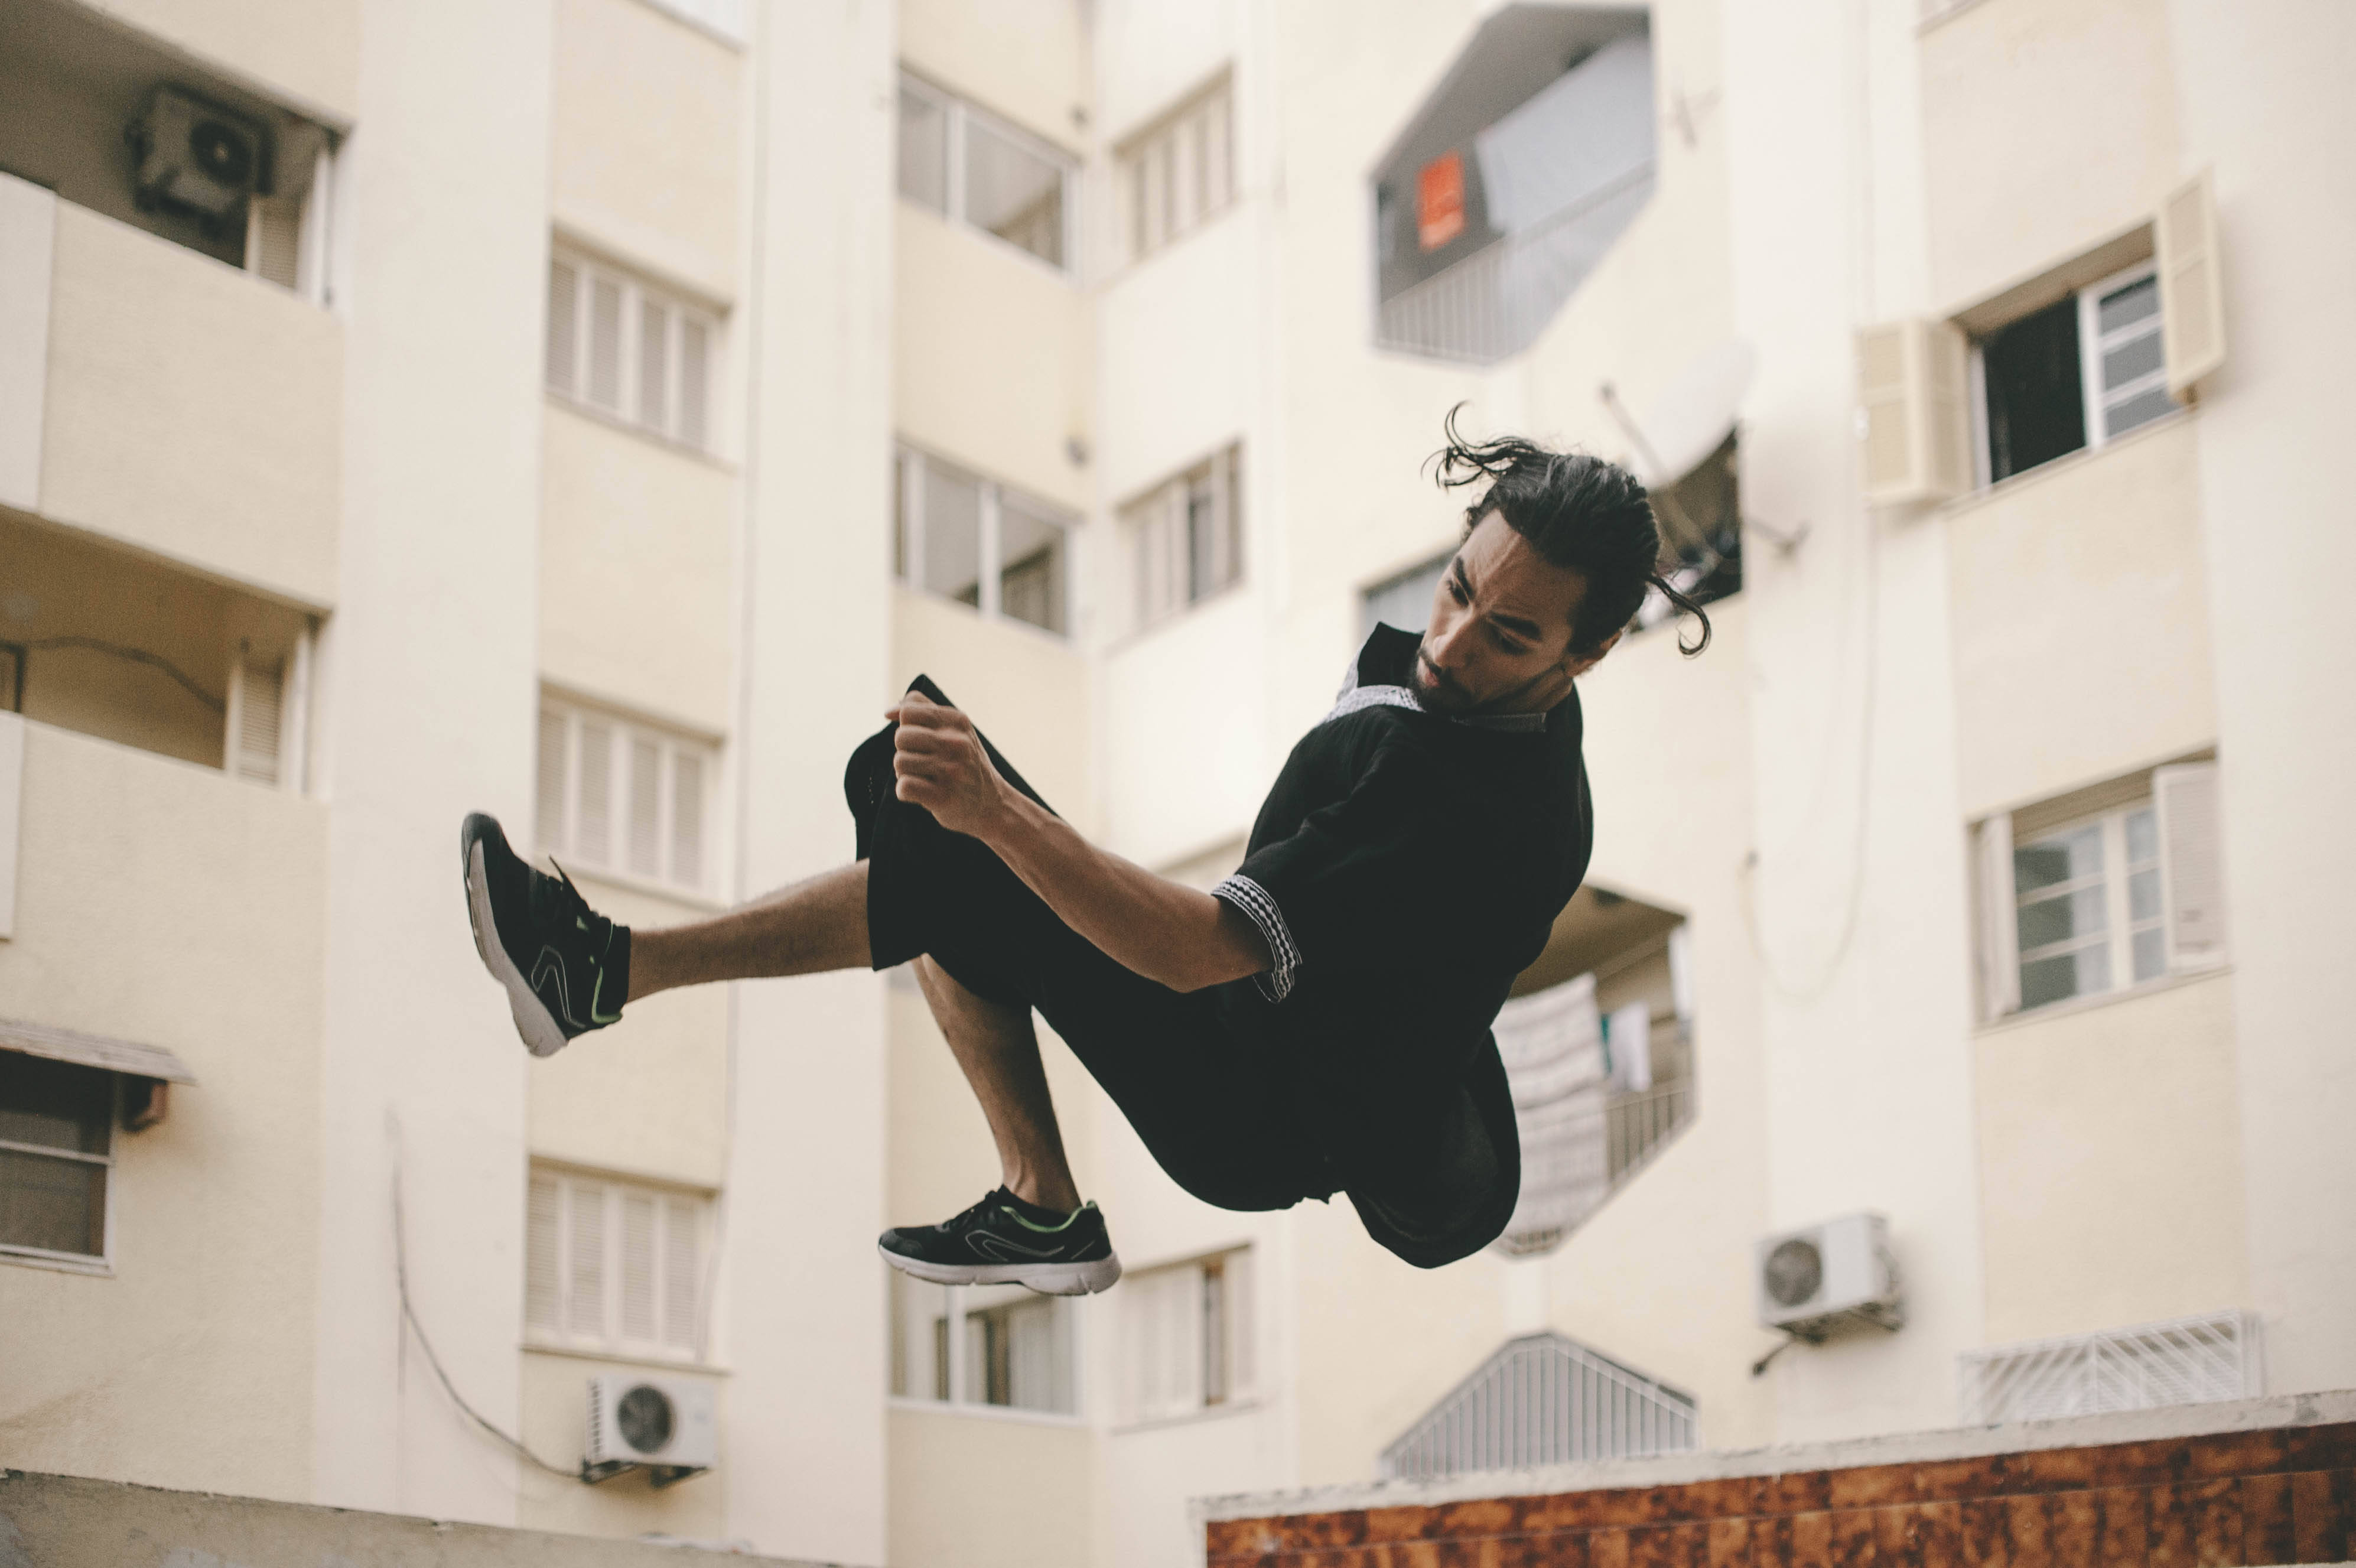 Download Parkour Stunt On Air Wallpaper Wallpapers Com